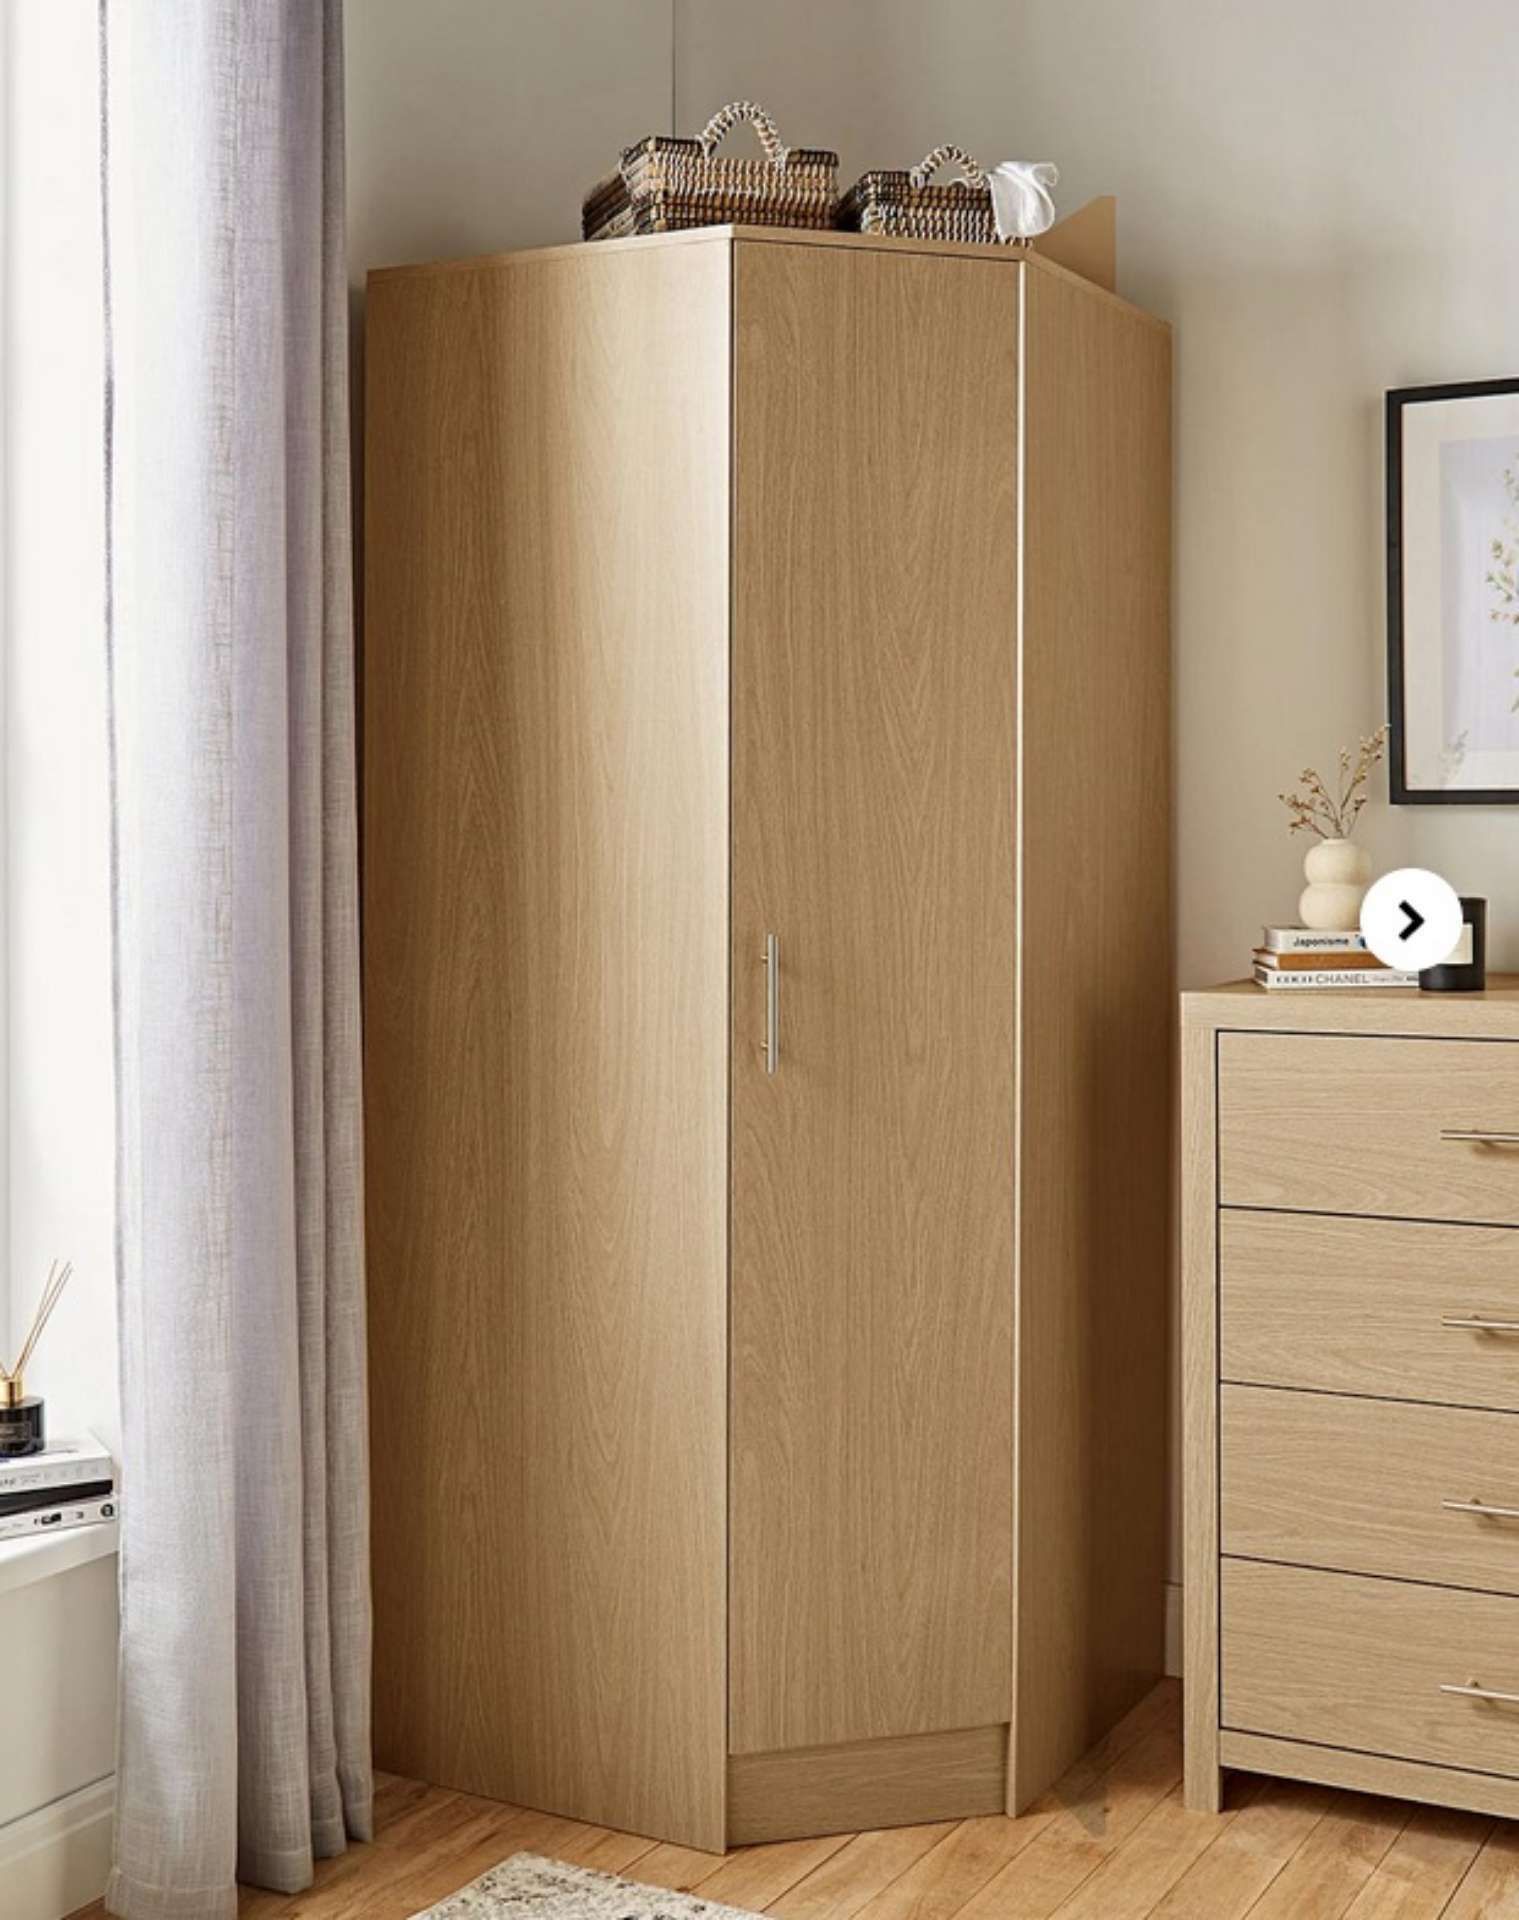 NEW & BOXED DAKOTA Corner Wardrobe. OAK EFFECT. RRP £269 EACH. Part of At Home Collection, the